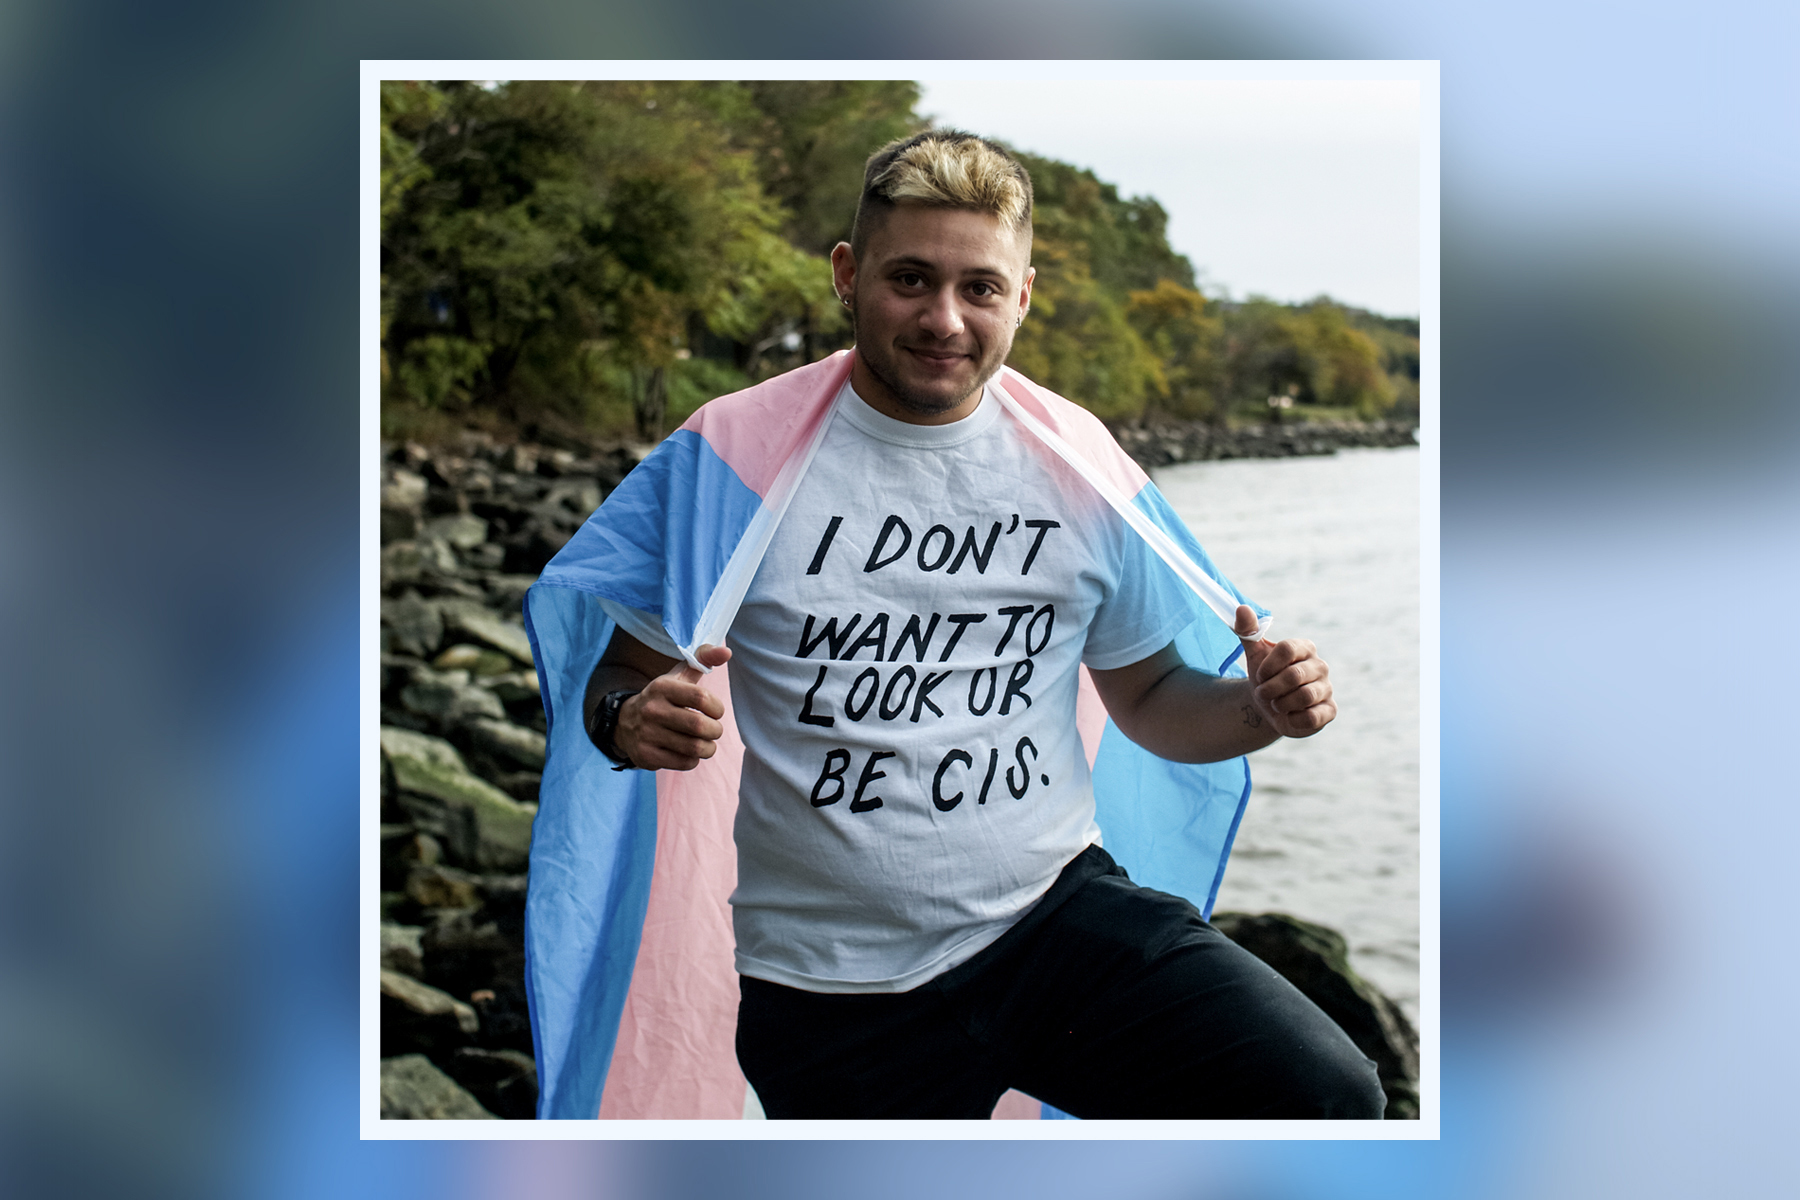 Photograph of essay author Dylan Kapit. They are standing outside looking straight at the camera. They're wearing a transgender pride flag around their shoulders and a shirt that says I don't want to look or be cis.